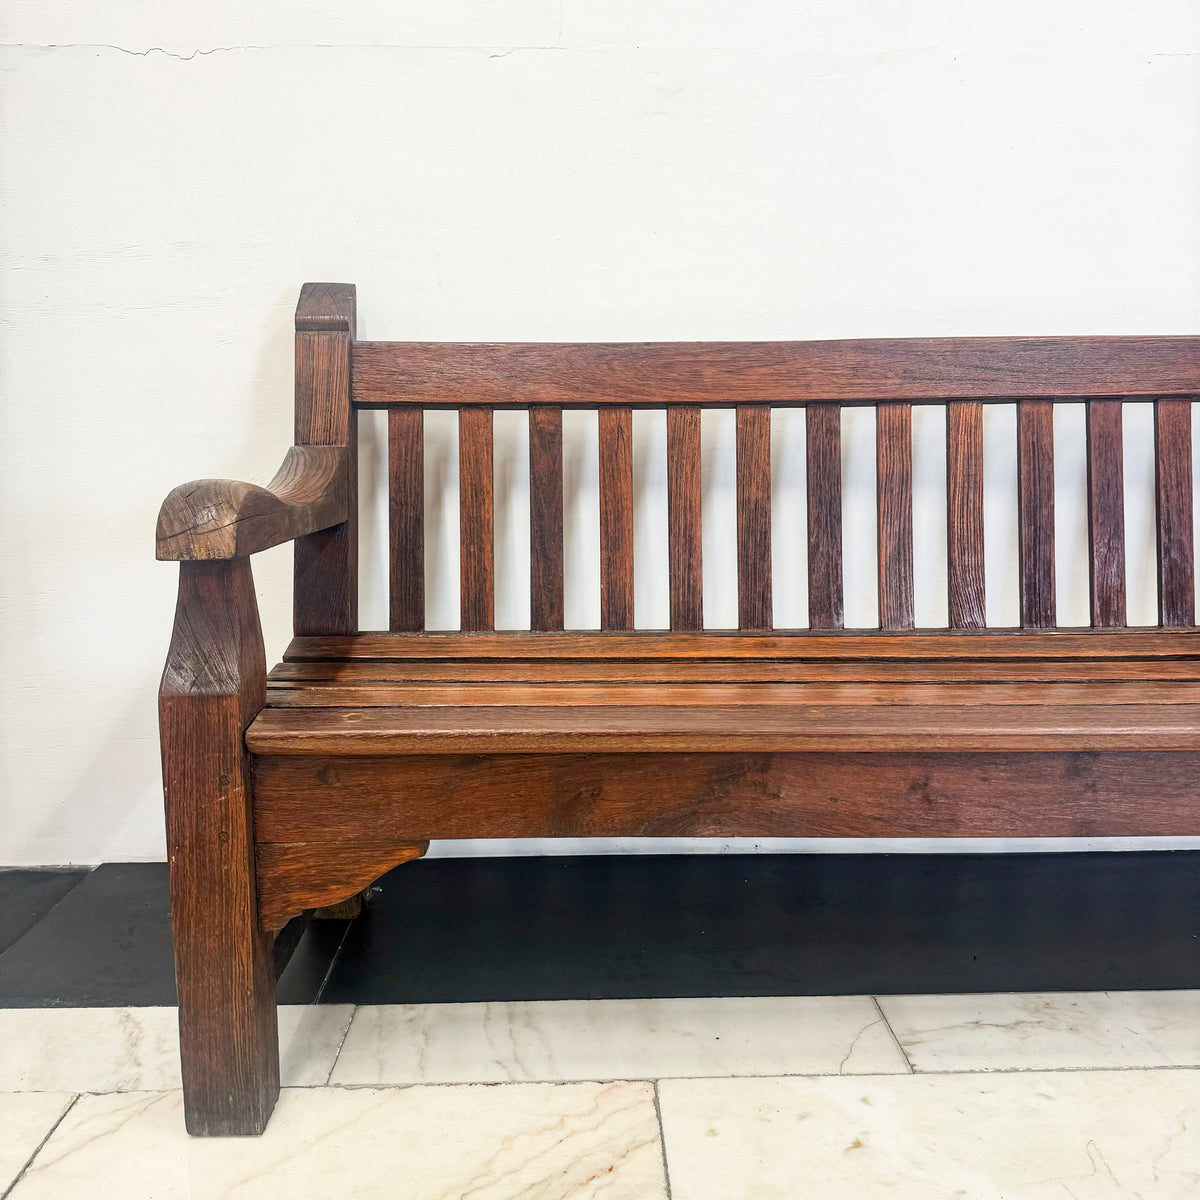 Reclaimed Teak Wooden Bench | The Architectural Forum